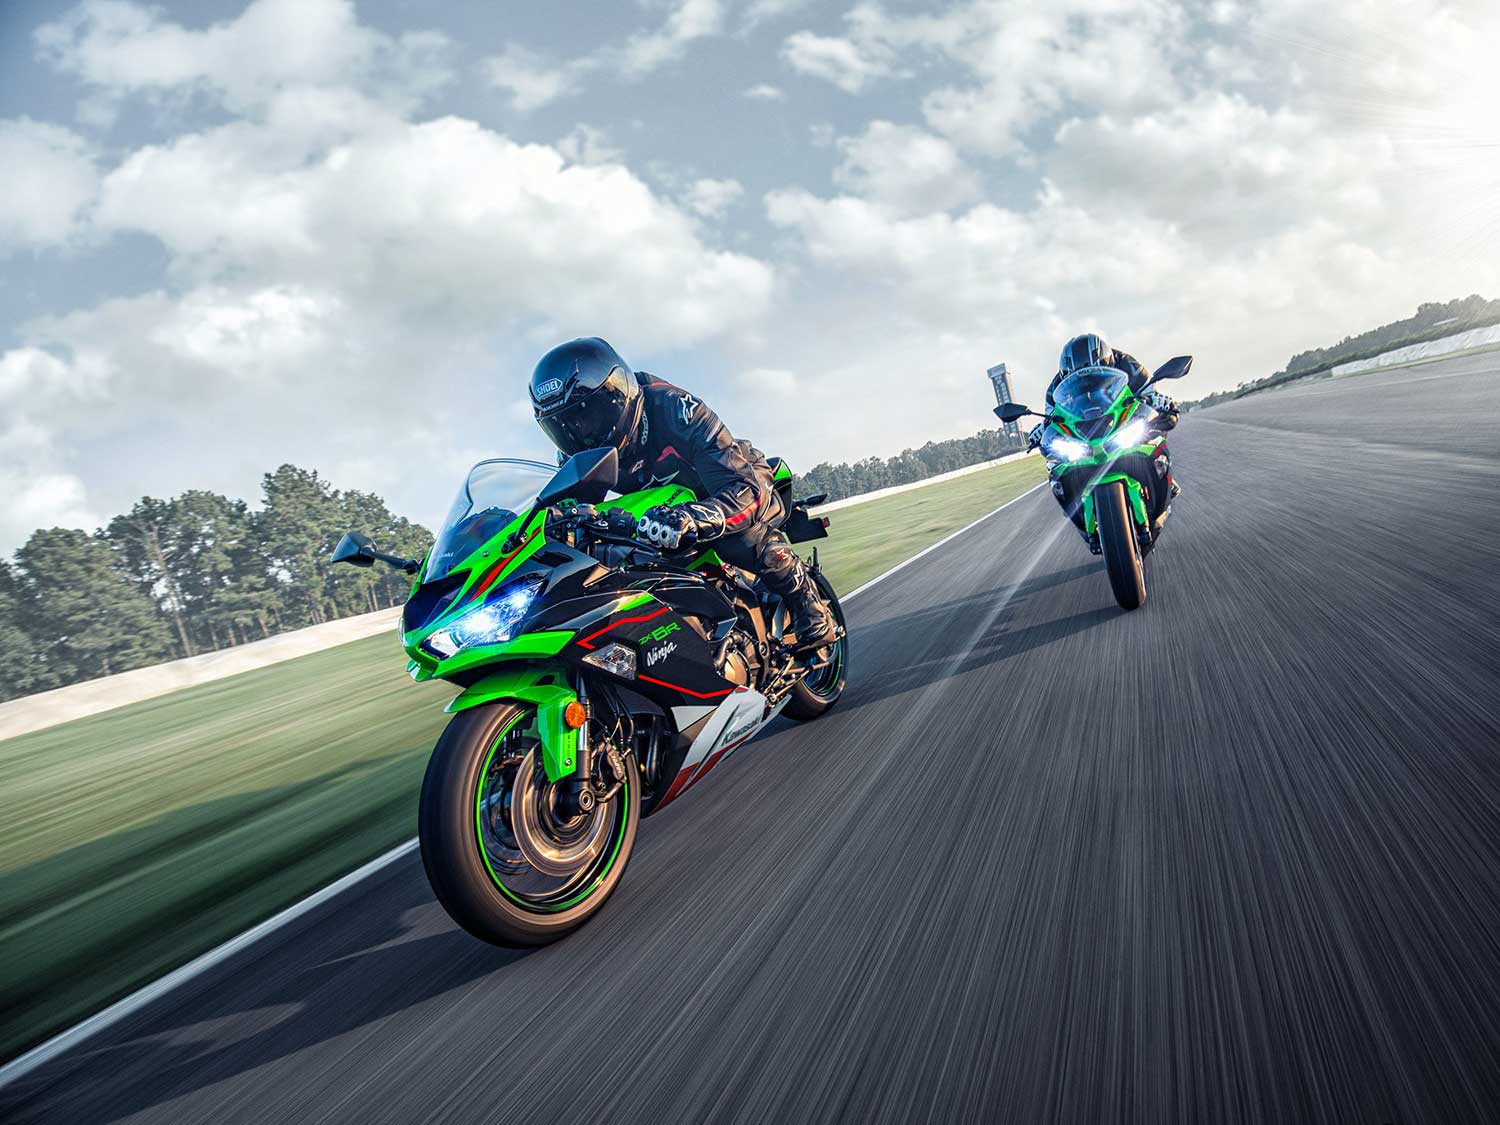 2021 Kawasaki Ninja ZX-6R And ZX-14R First Look Preview | Motorcyclist